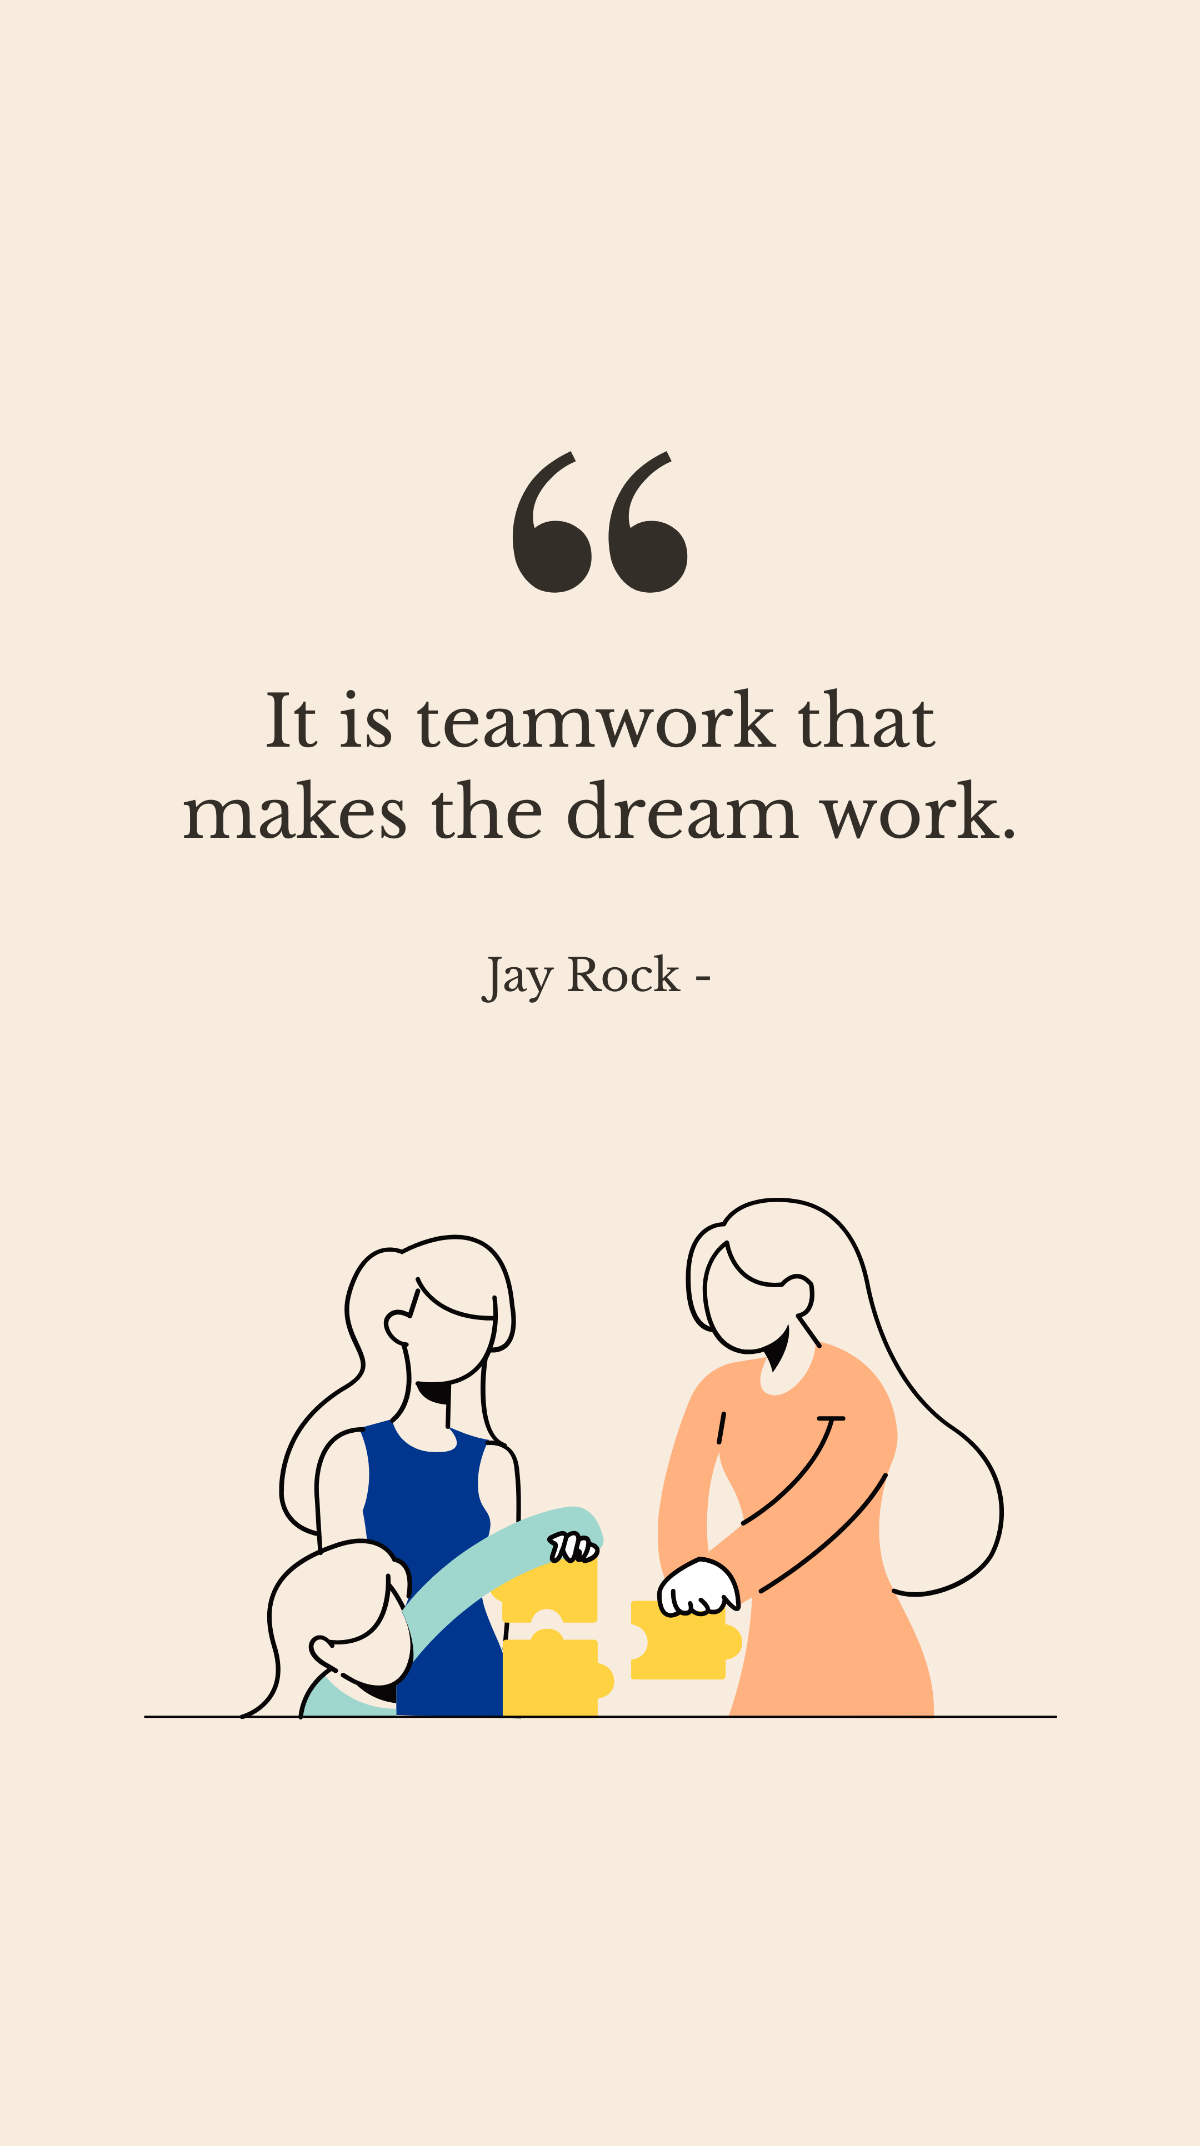 Jay Rock - It is teamwork that makes the dream work. Template